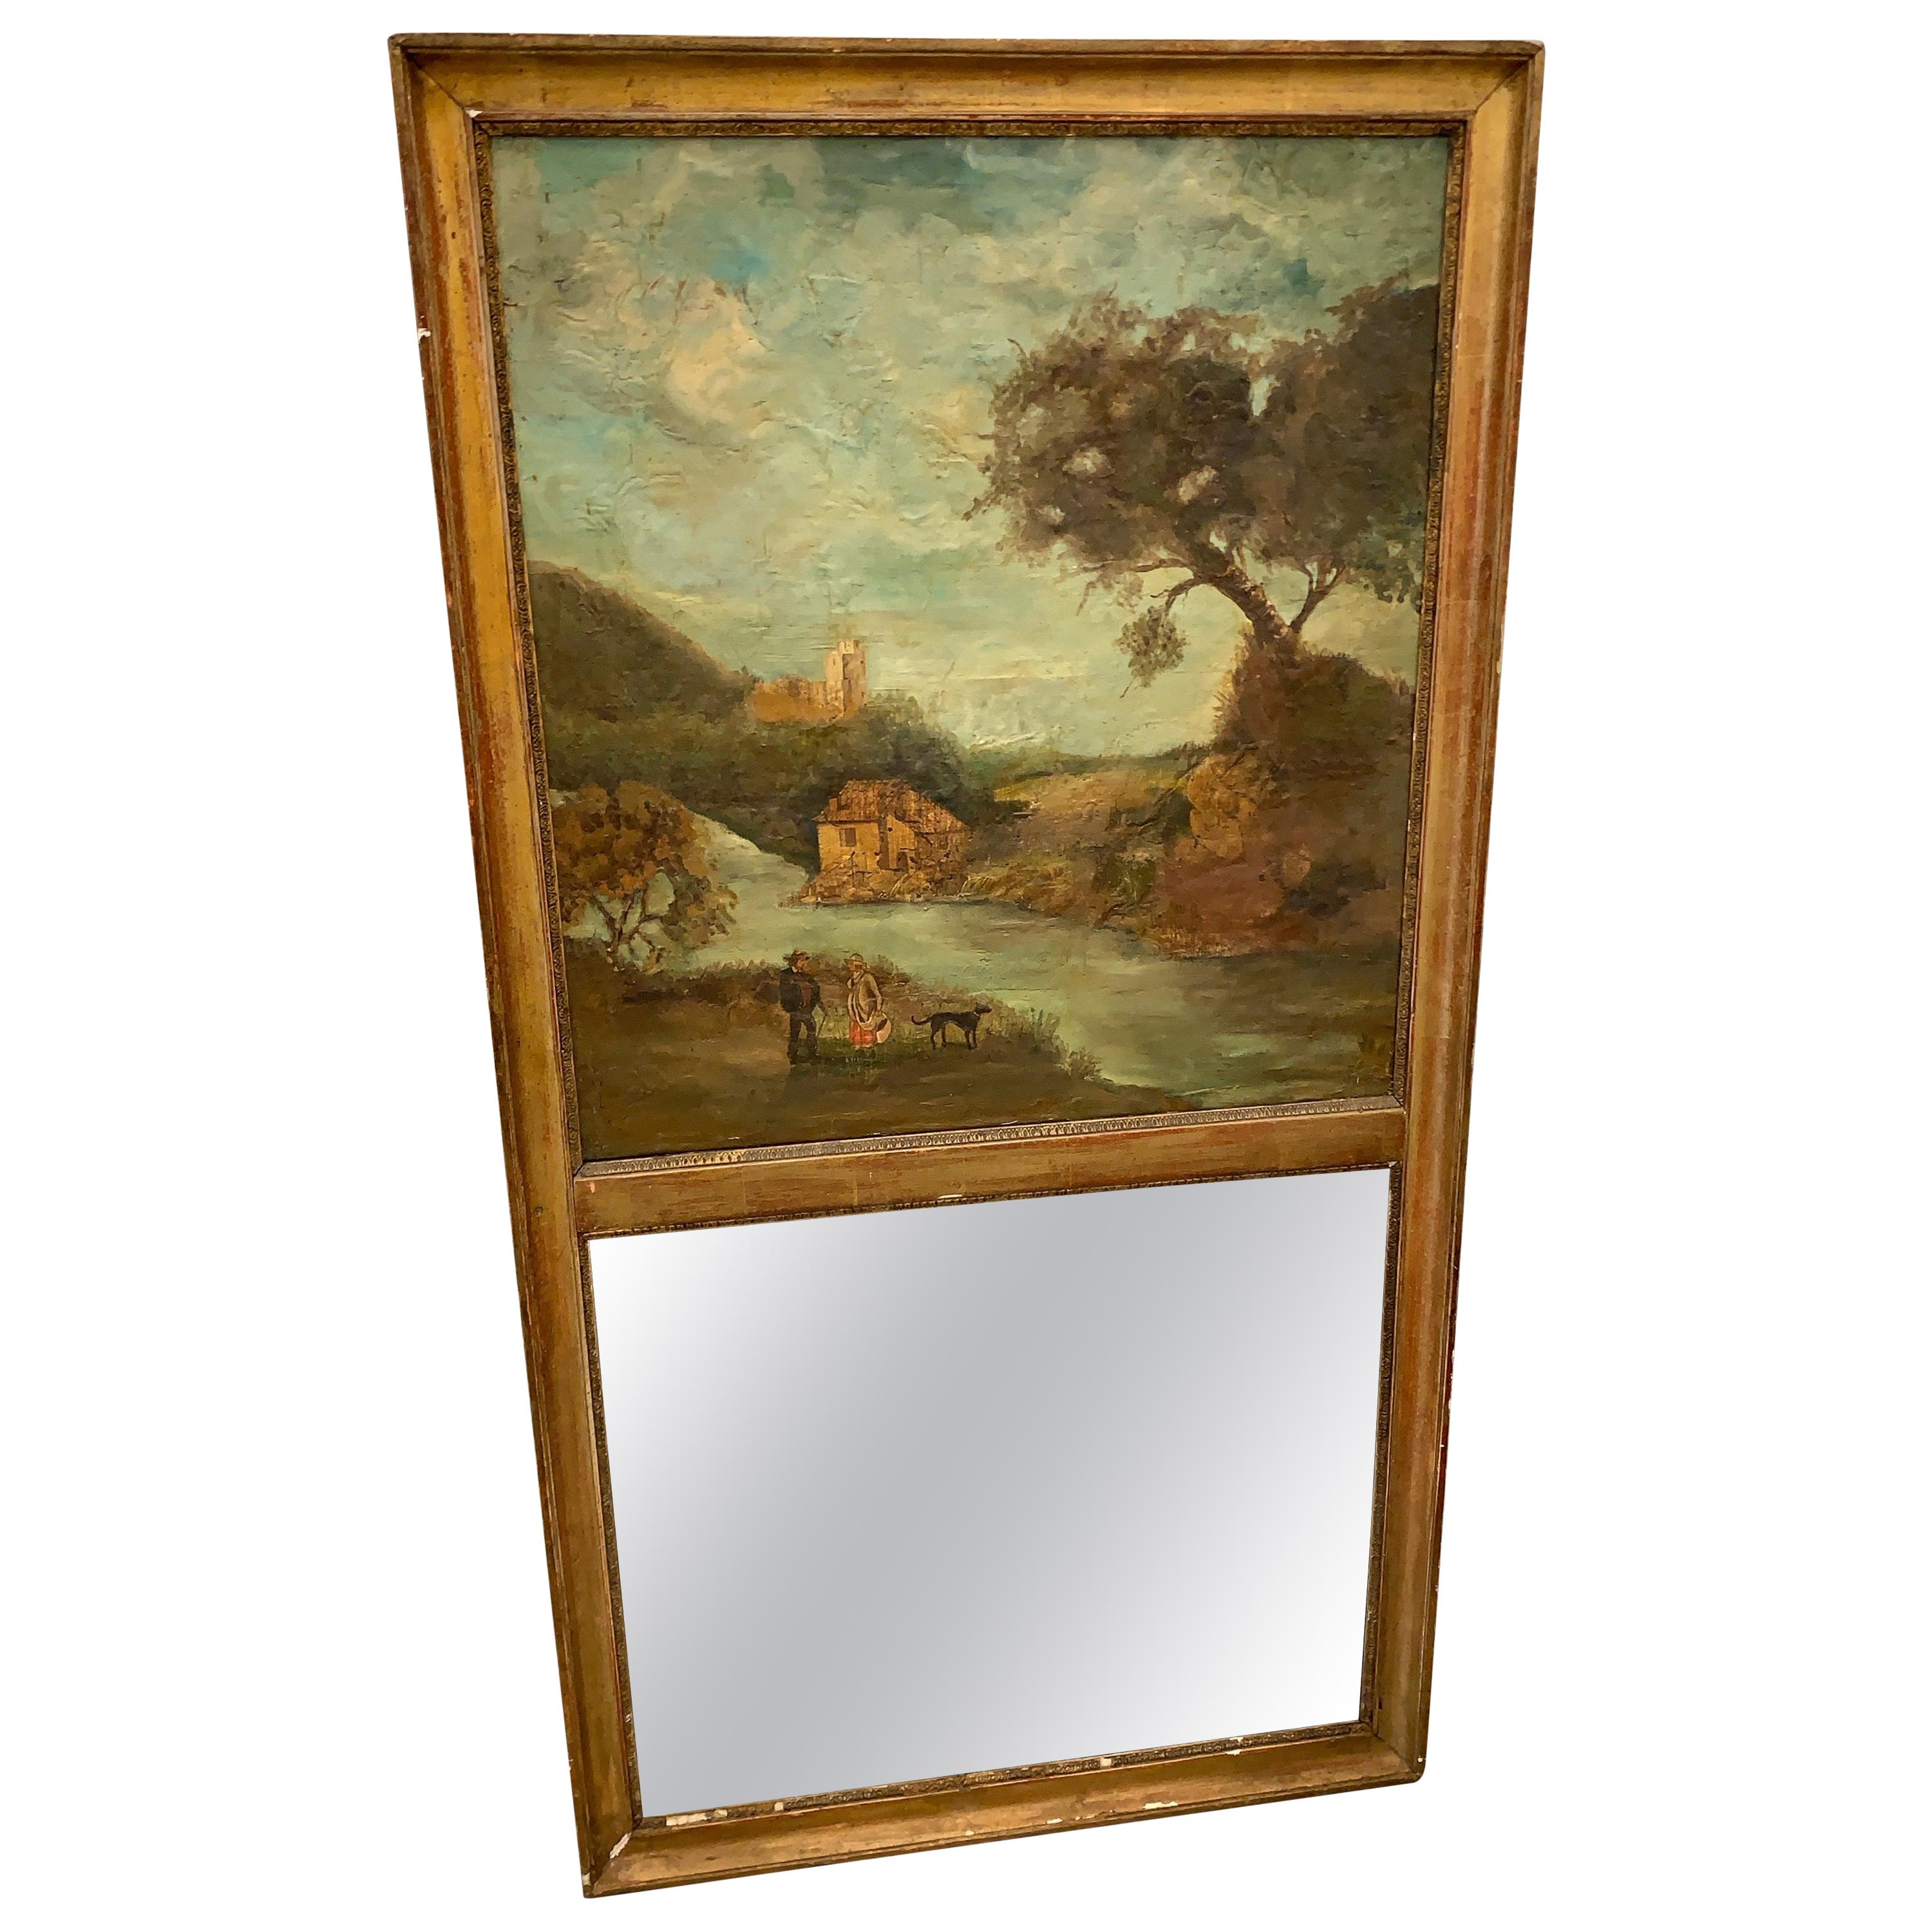 Early Nineteenth Century French Trumeau Antique Gilt Mirror Painting on Canvas